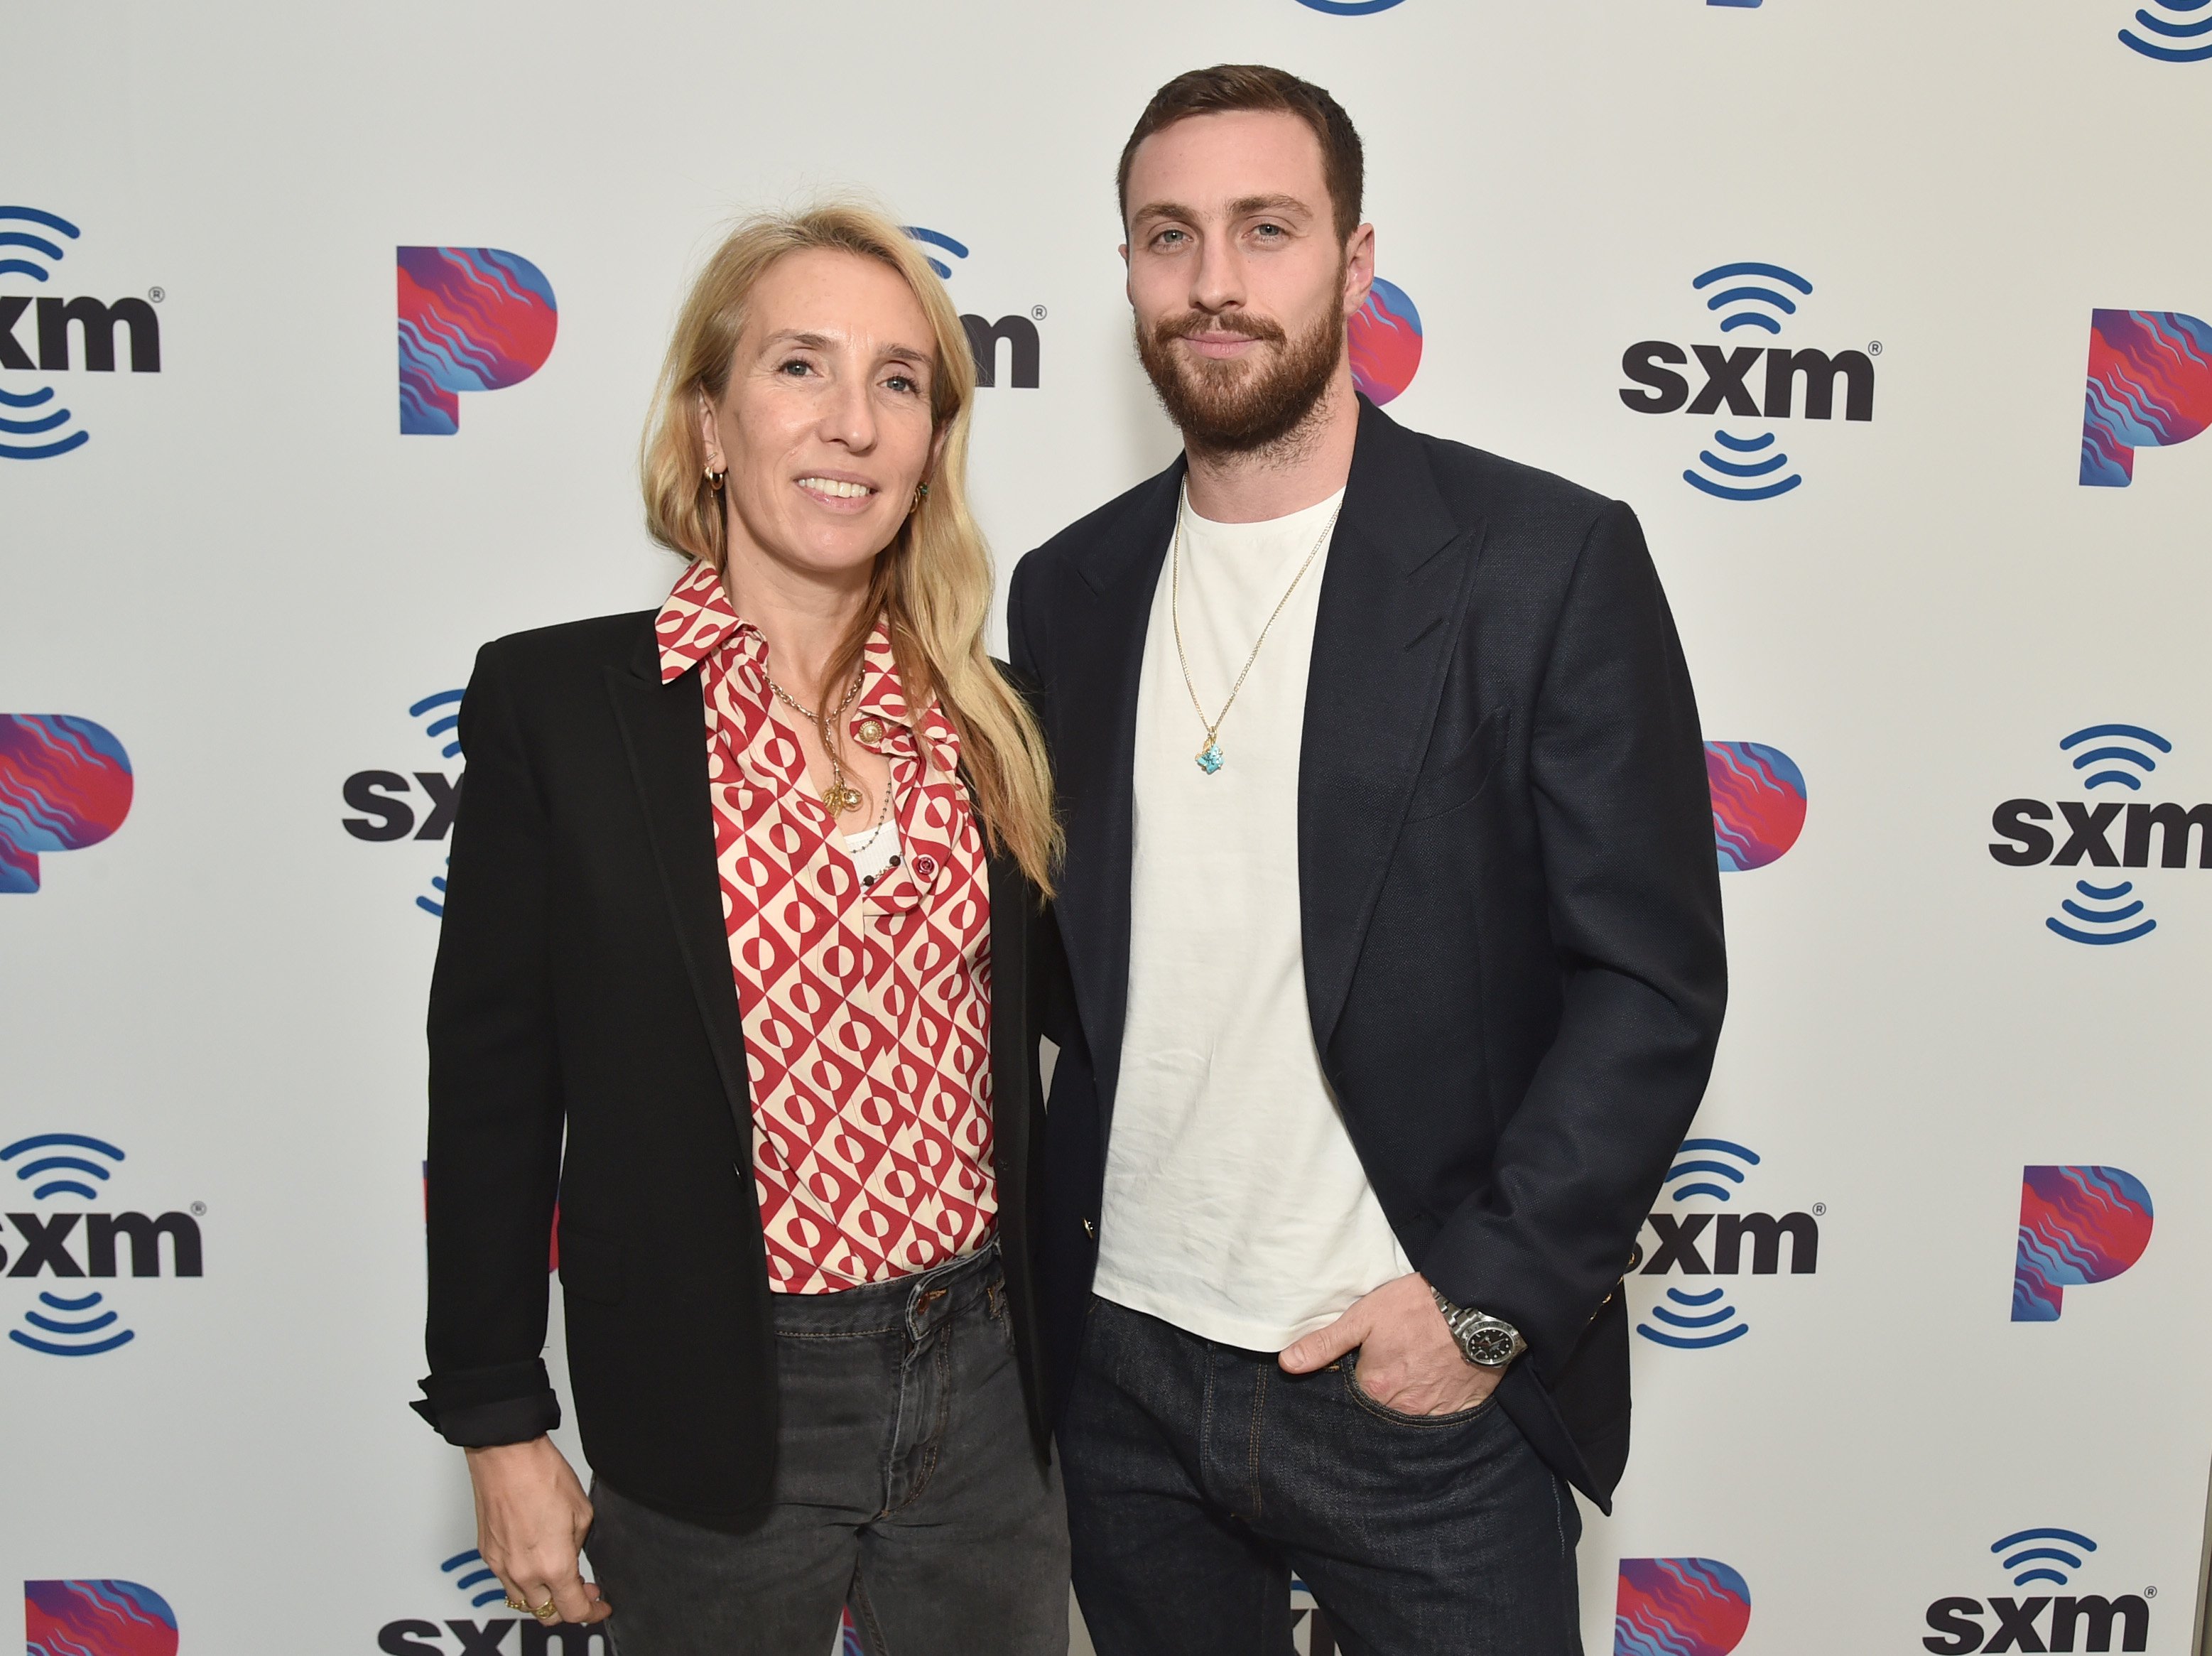 Sam Taylor-Johnson and Aaron Taylor-Johnson visit SiriusXM at The SiriusXM Hollywood Studio on December 05, 2019 in Los Angeles, California. | Source: Getty Images